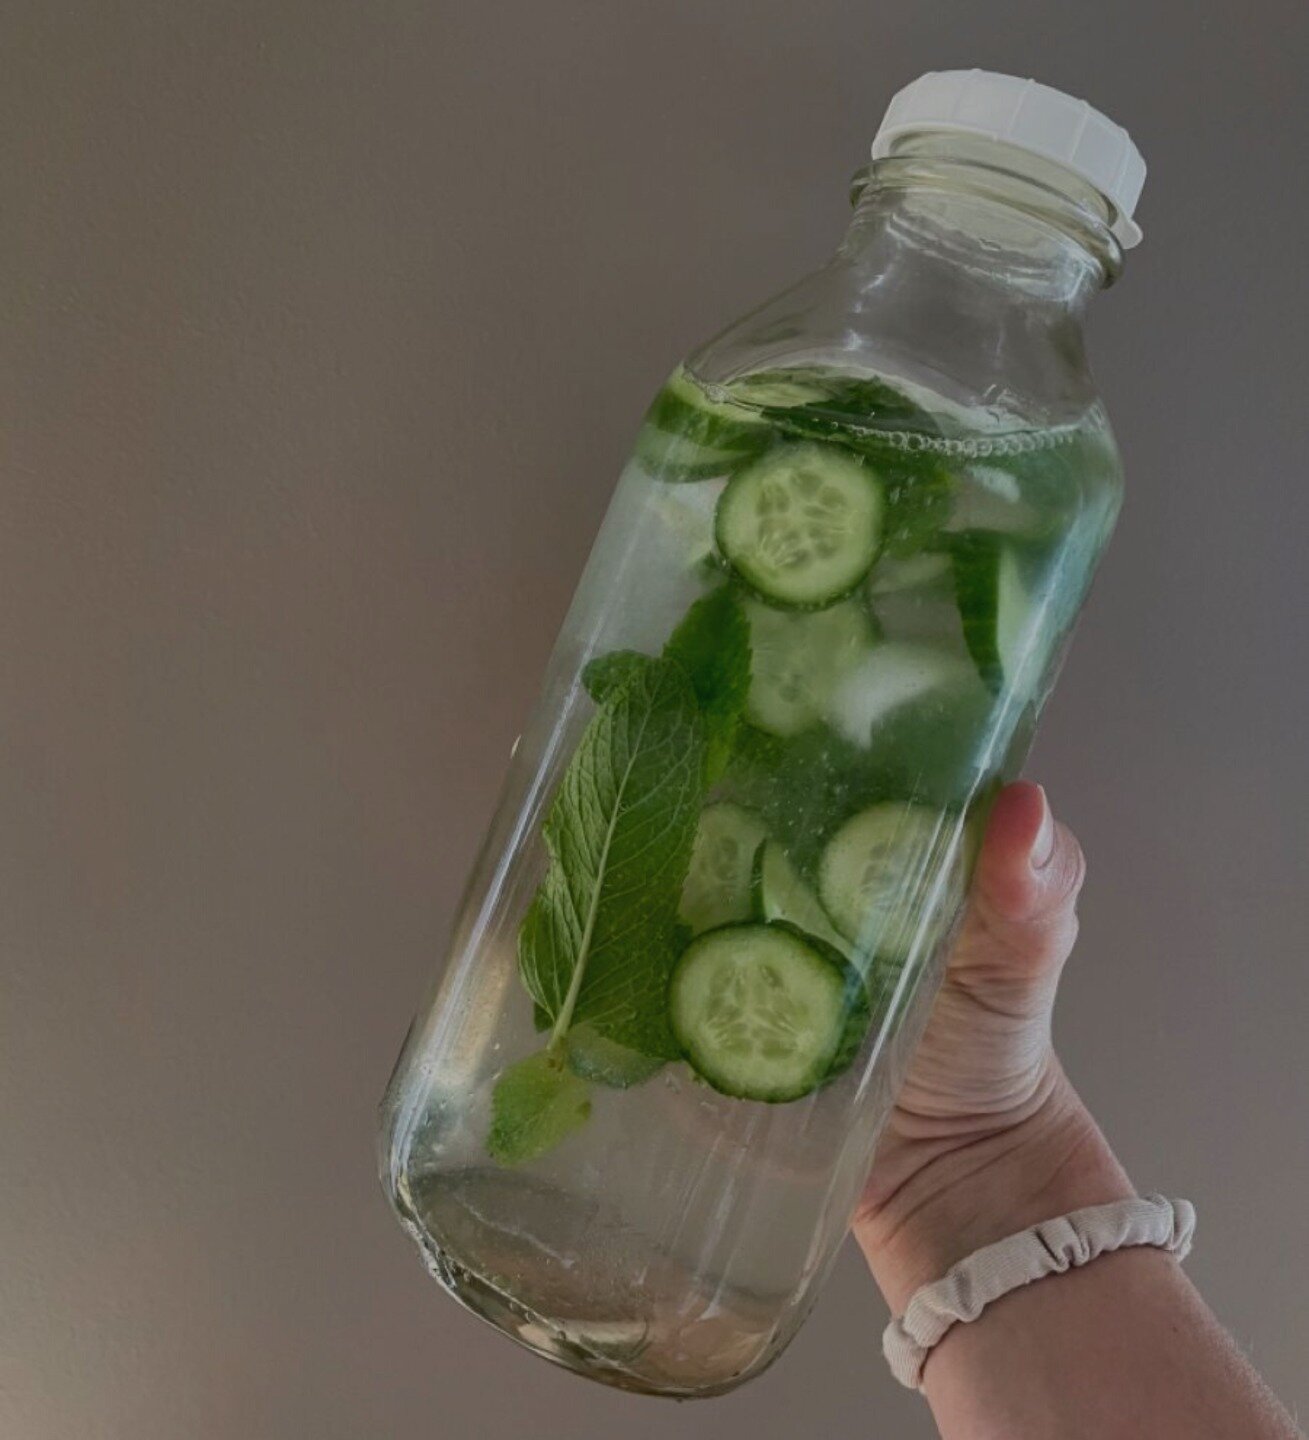 Infusing your water with cucumber provides amazing health benefits such as:

🥒 Aids in weight loss
🥒 Lowers blood pressure 
🥒 Improves bone health
🥒 Clears up skin

What do you like to add to your water for additional taste and nutrients?

#calab